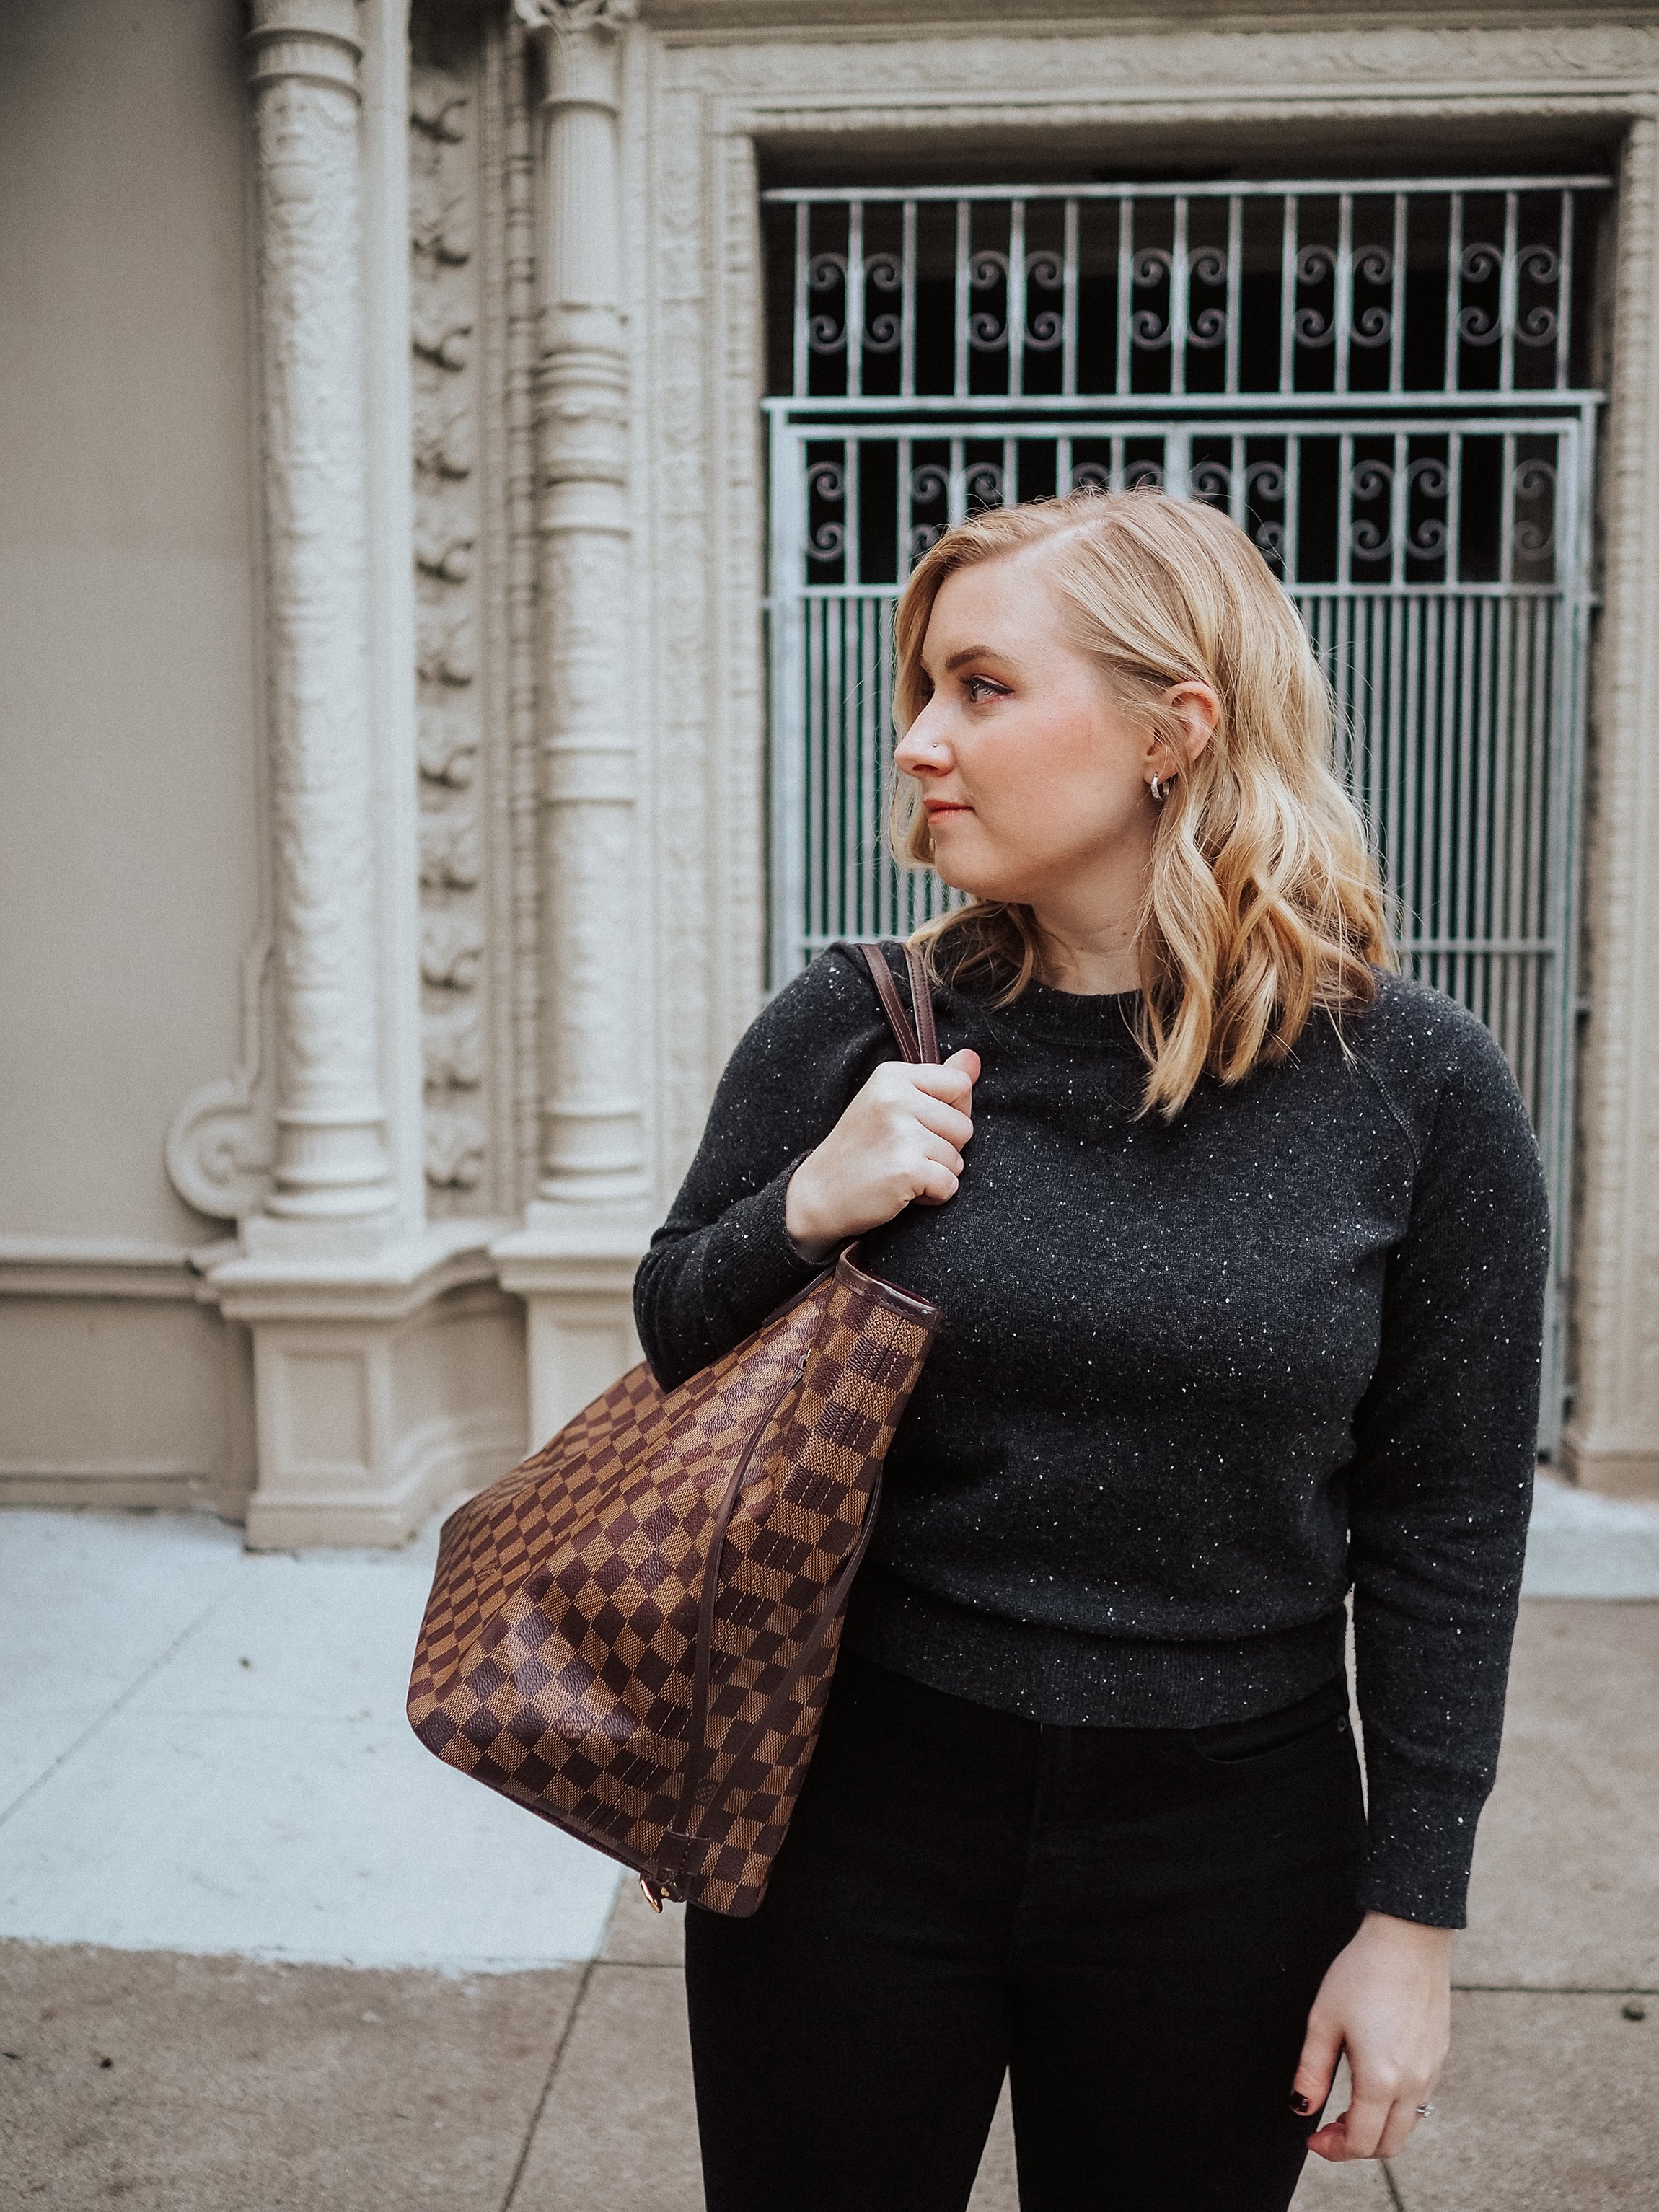 neverfull-gm-fashionphile-review | Blondes & Bagels